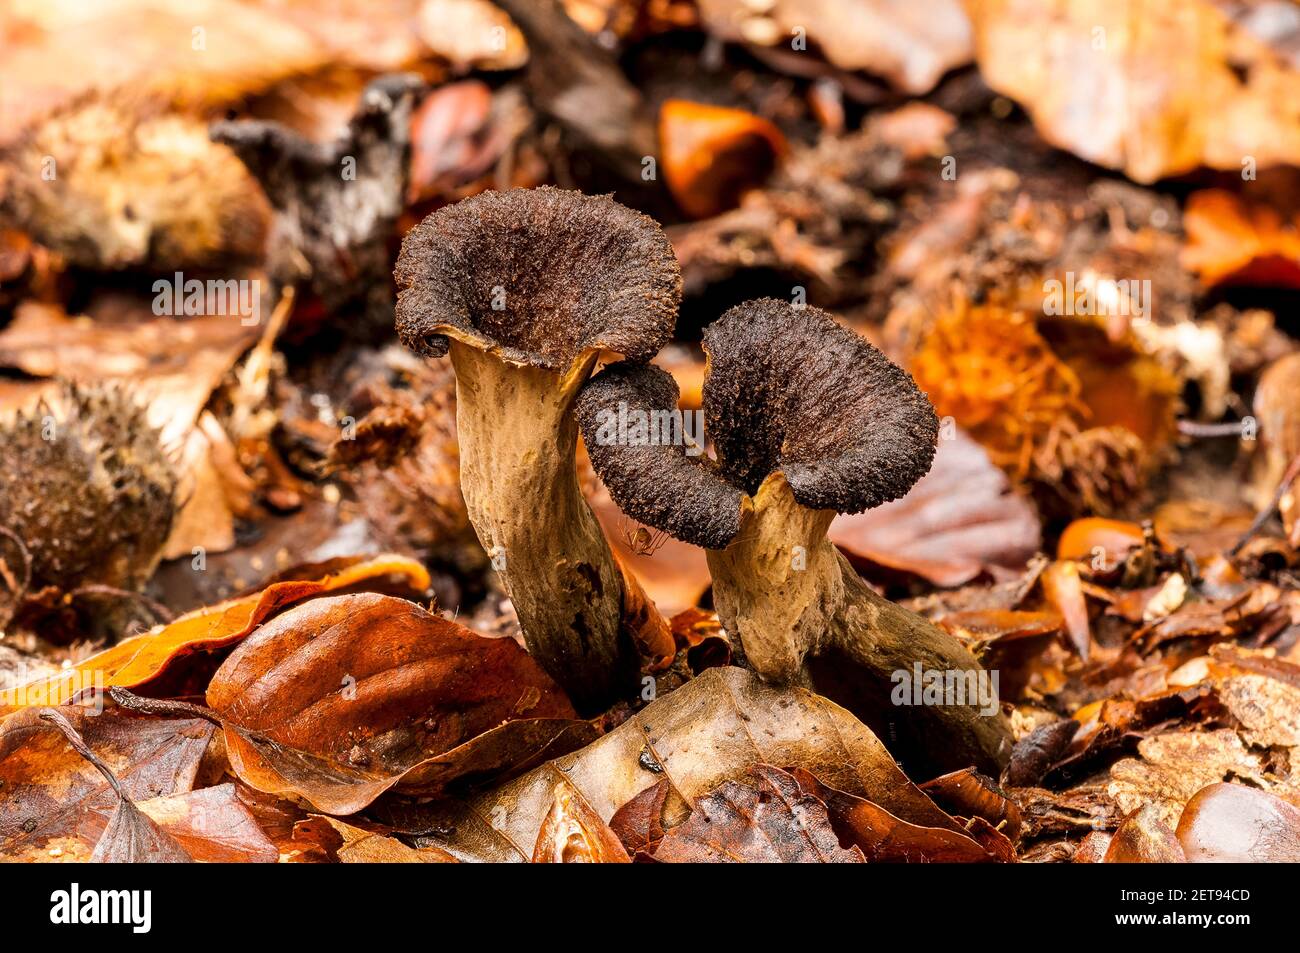 Fruiting bodies of the horn of plenty fungus (Craterellus cornucopioides) growing amidst fallen beech leaves in the New Forest, Hampshire. October. Stock Photo